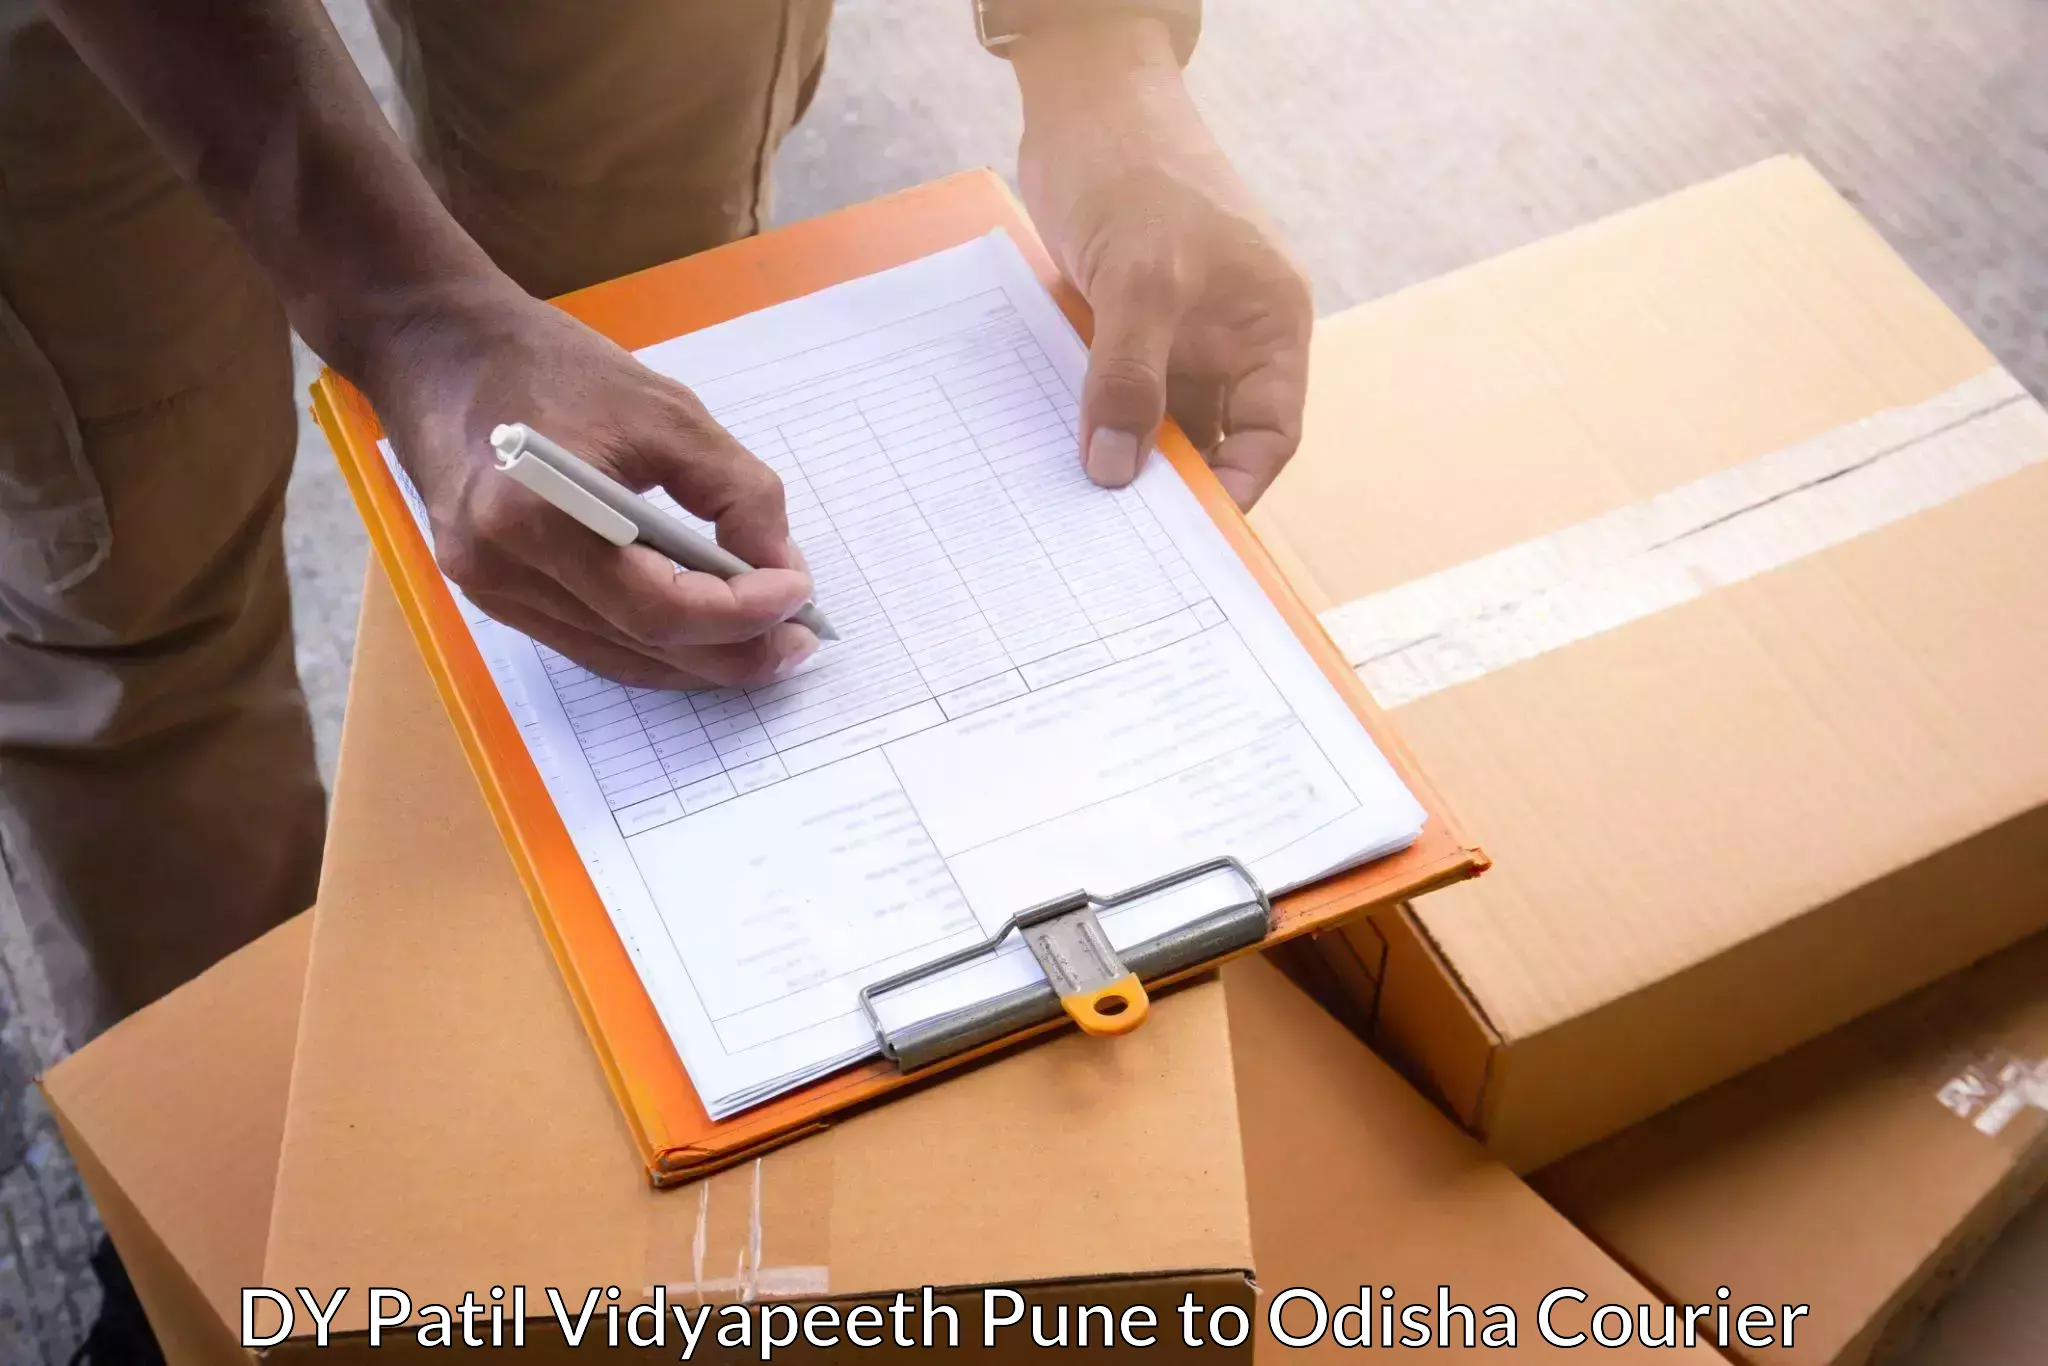 Full-service courier options DY Patil Vidyapeeth Pune to Nabarangpur